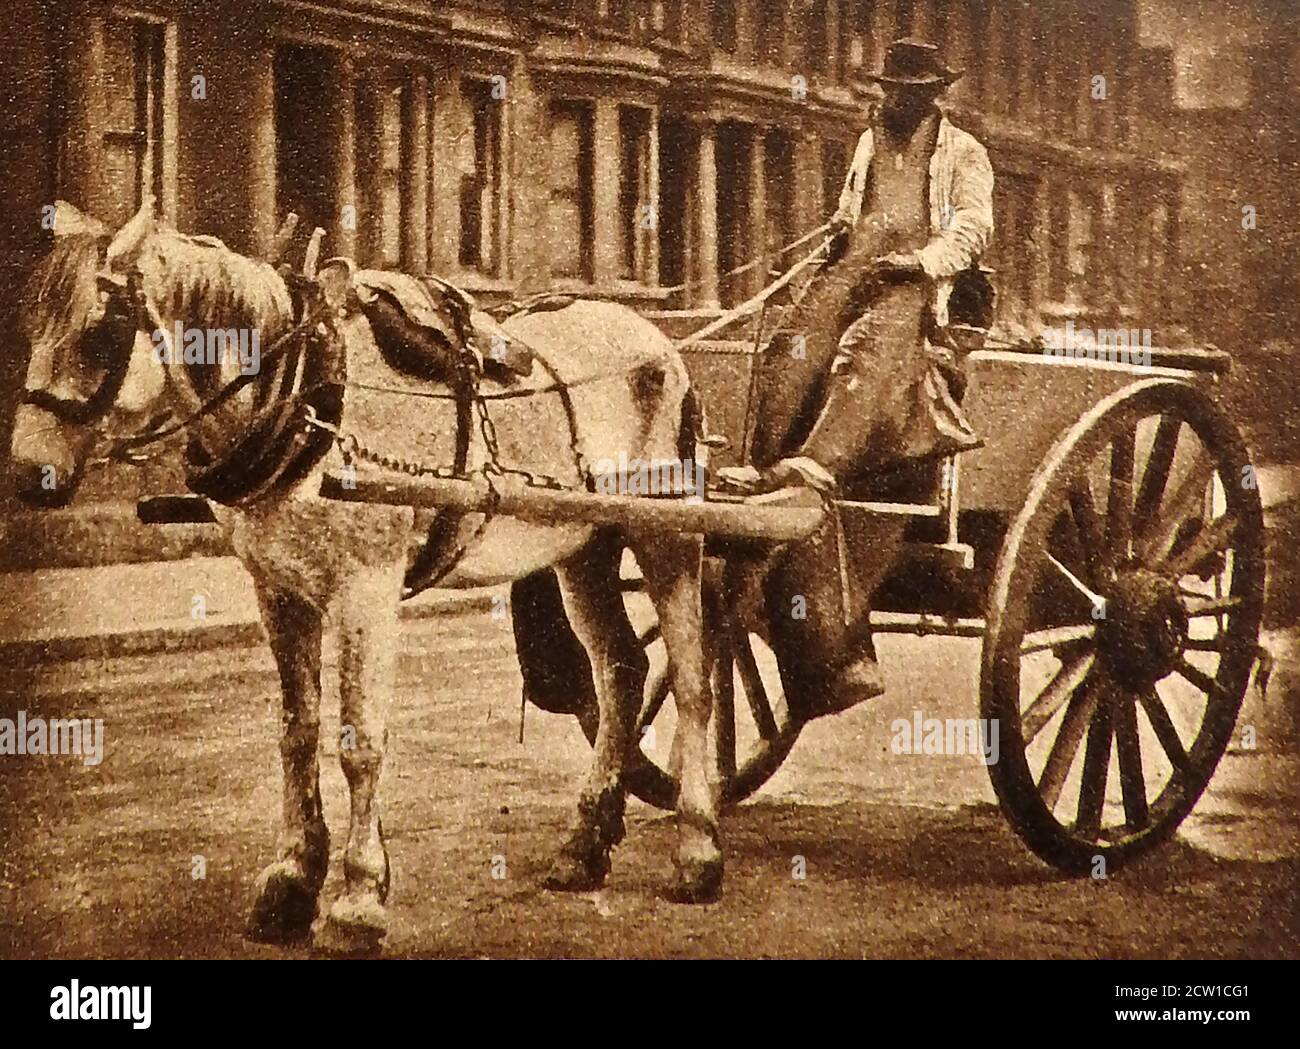 1900 - A London water cart used for damping down dusty roads. They were employed by local authorities and obtained their water supply from pumps or ponds. Stock Photo